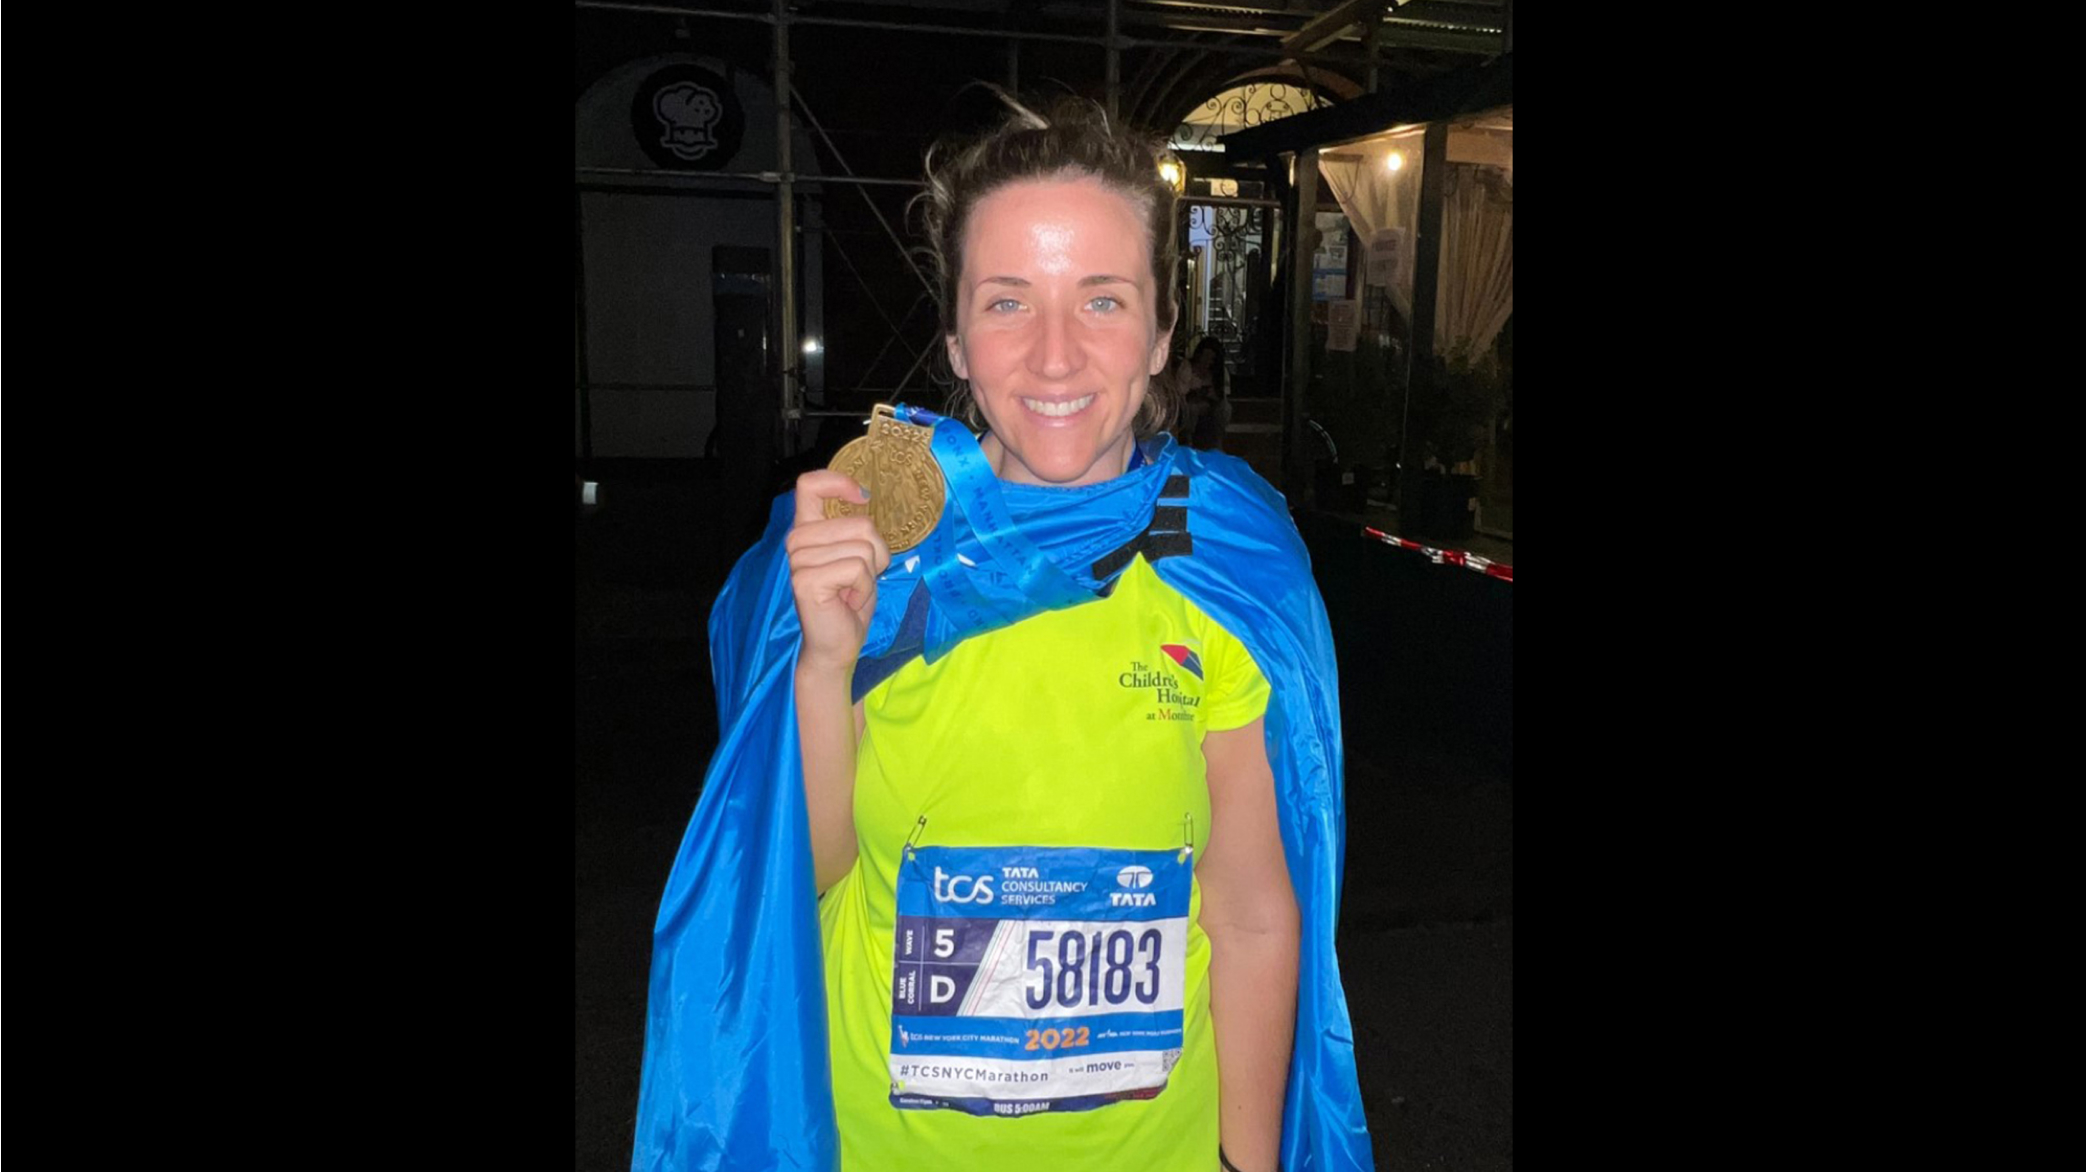 A runner in a neon yellow shirt and blue cape/blanket holds up their golden medal with a proud smile.